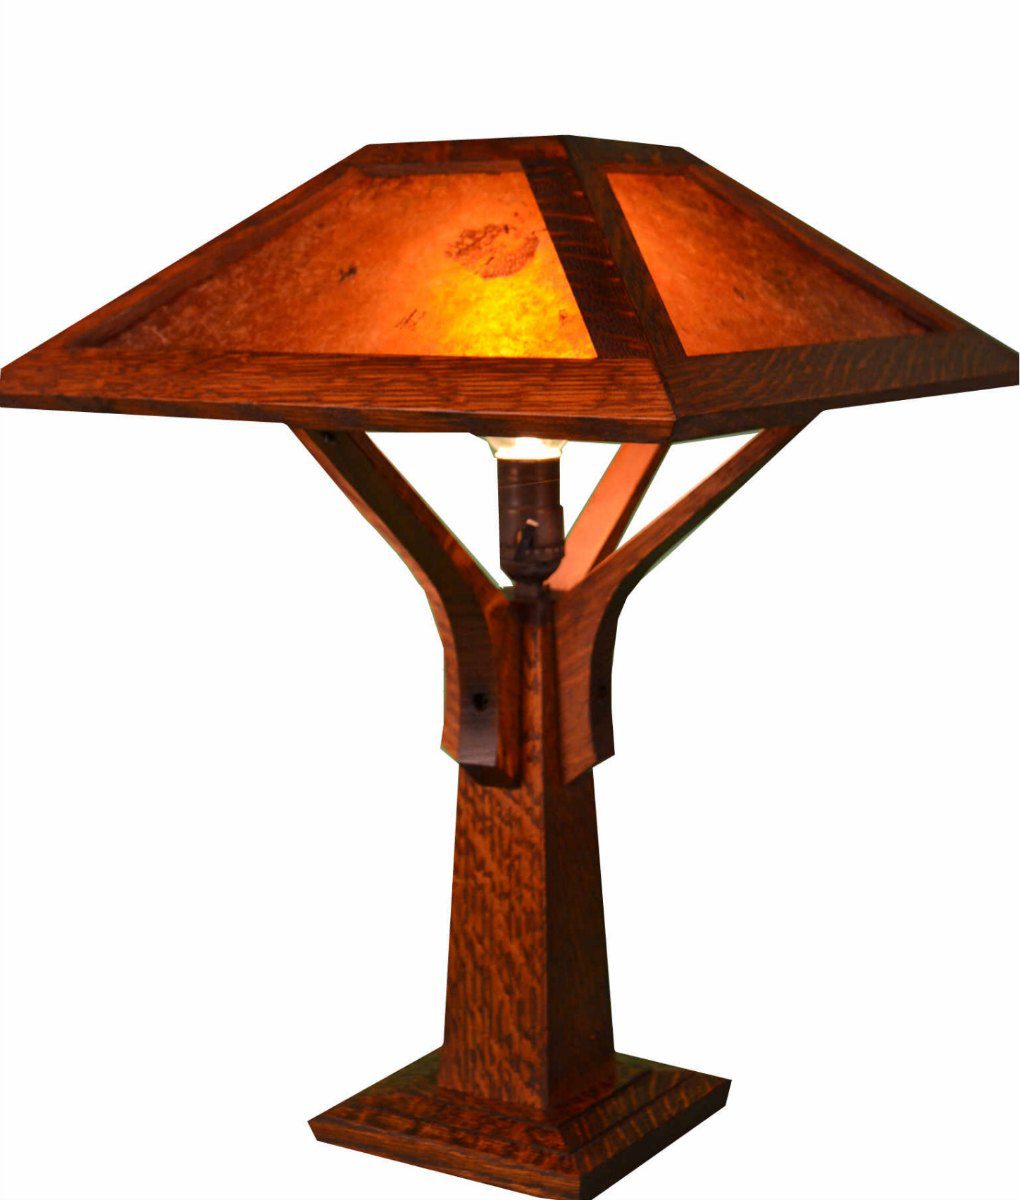 Craftsman Inspired Table Lamp